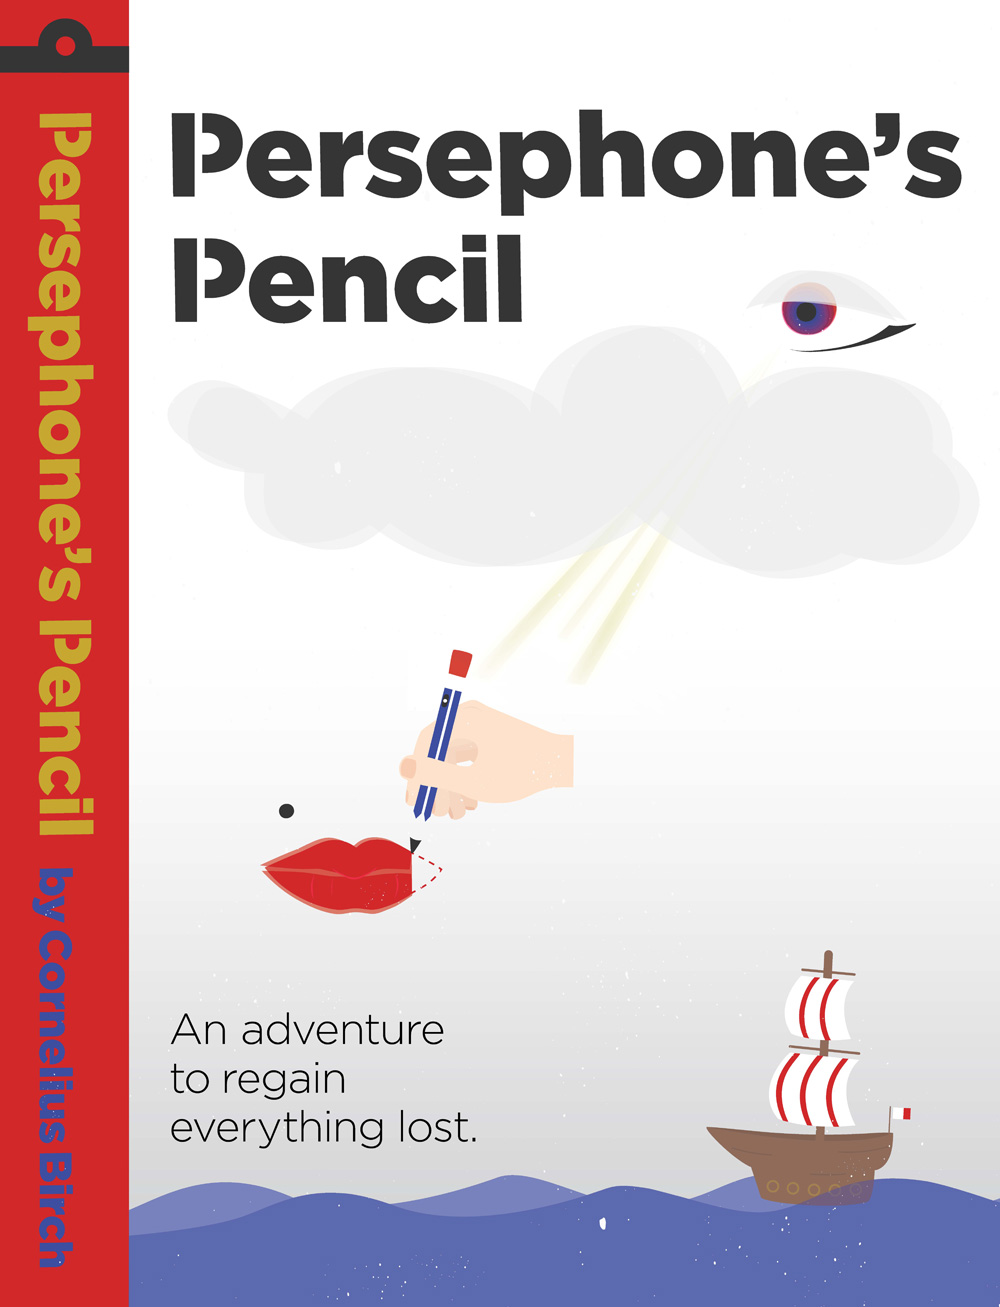 Persephone's Pencil by Cornelius Birch - An adventure to regain everything lost